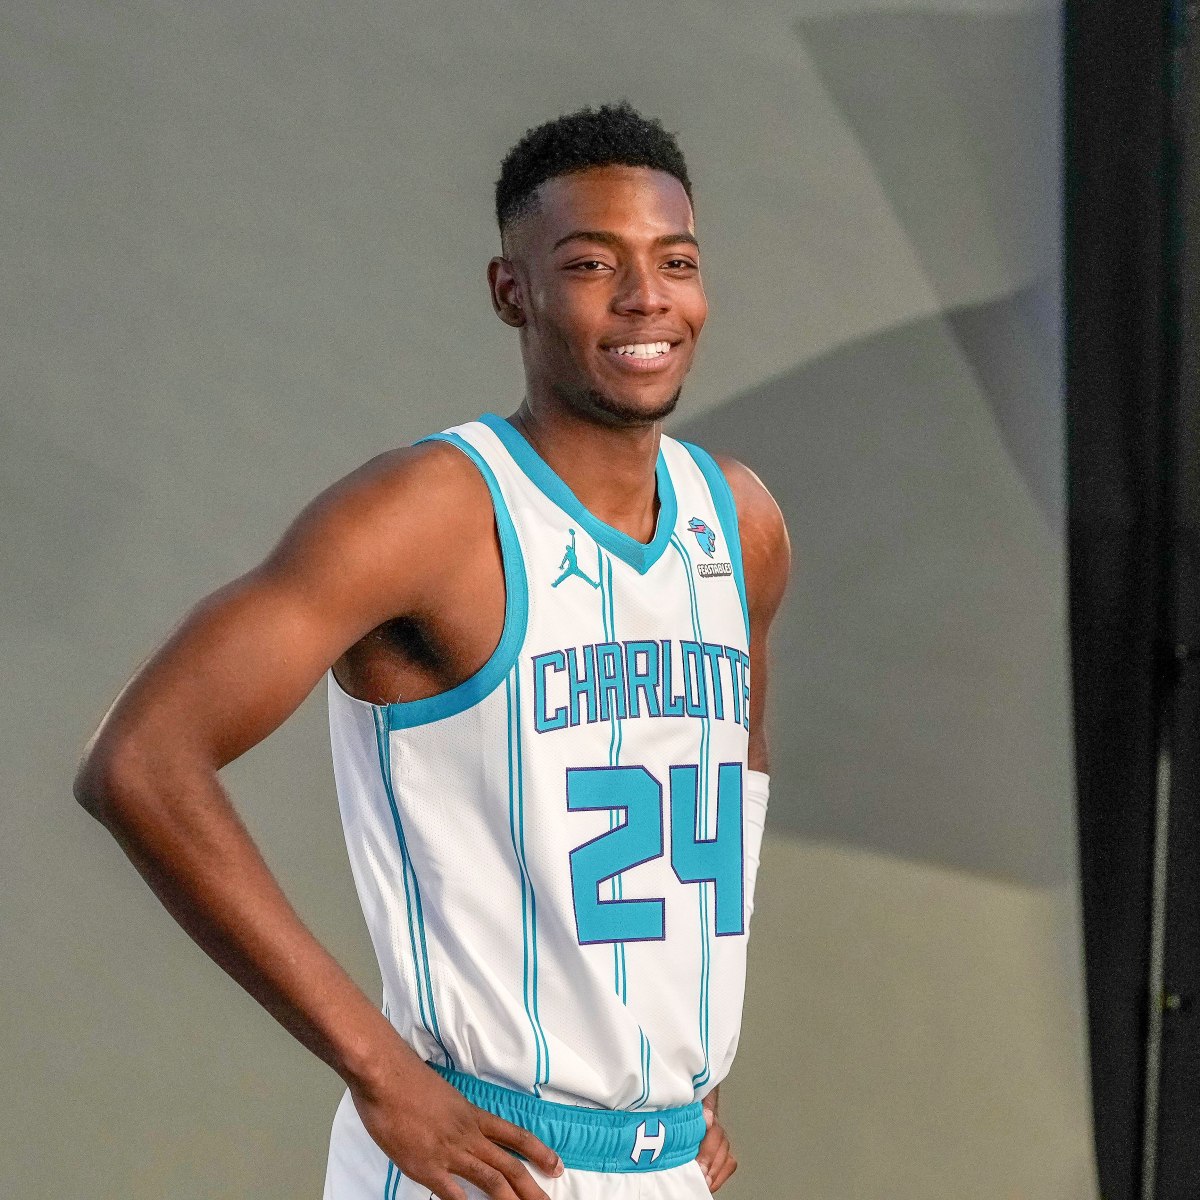 How did rookie Brandon Miller do in his Hornets debut?